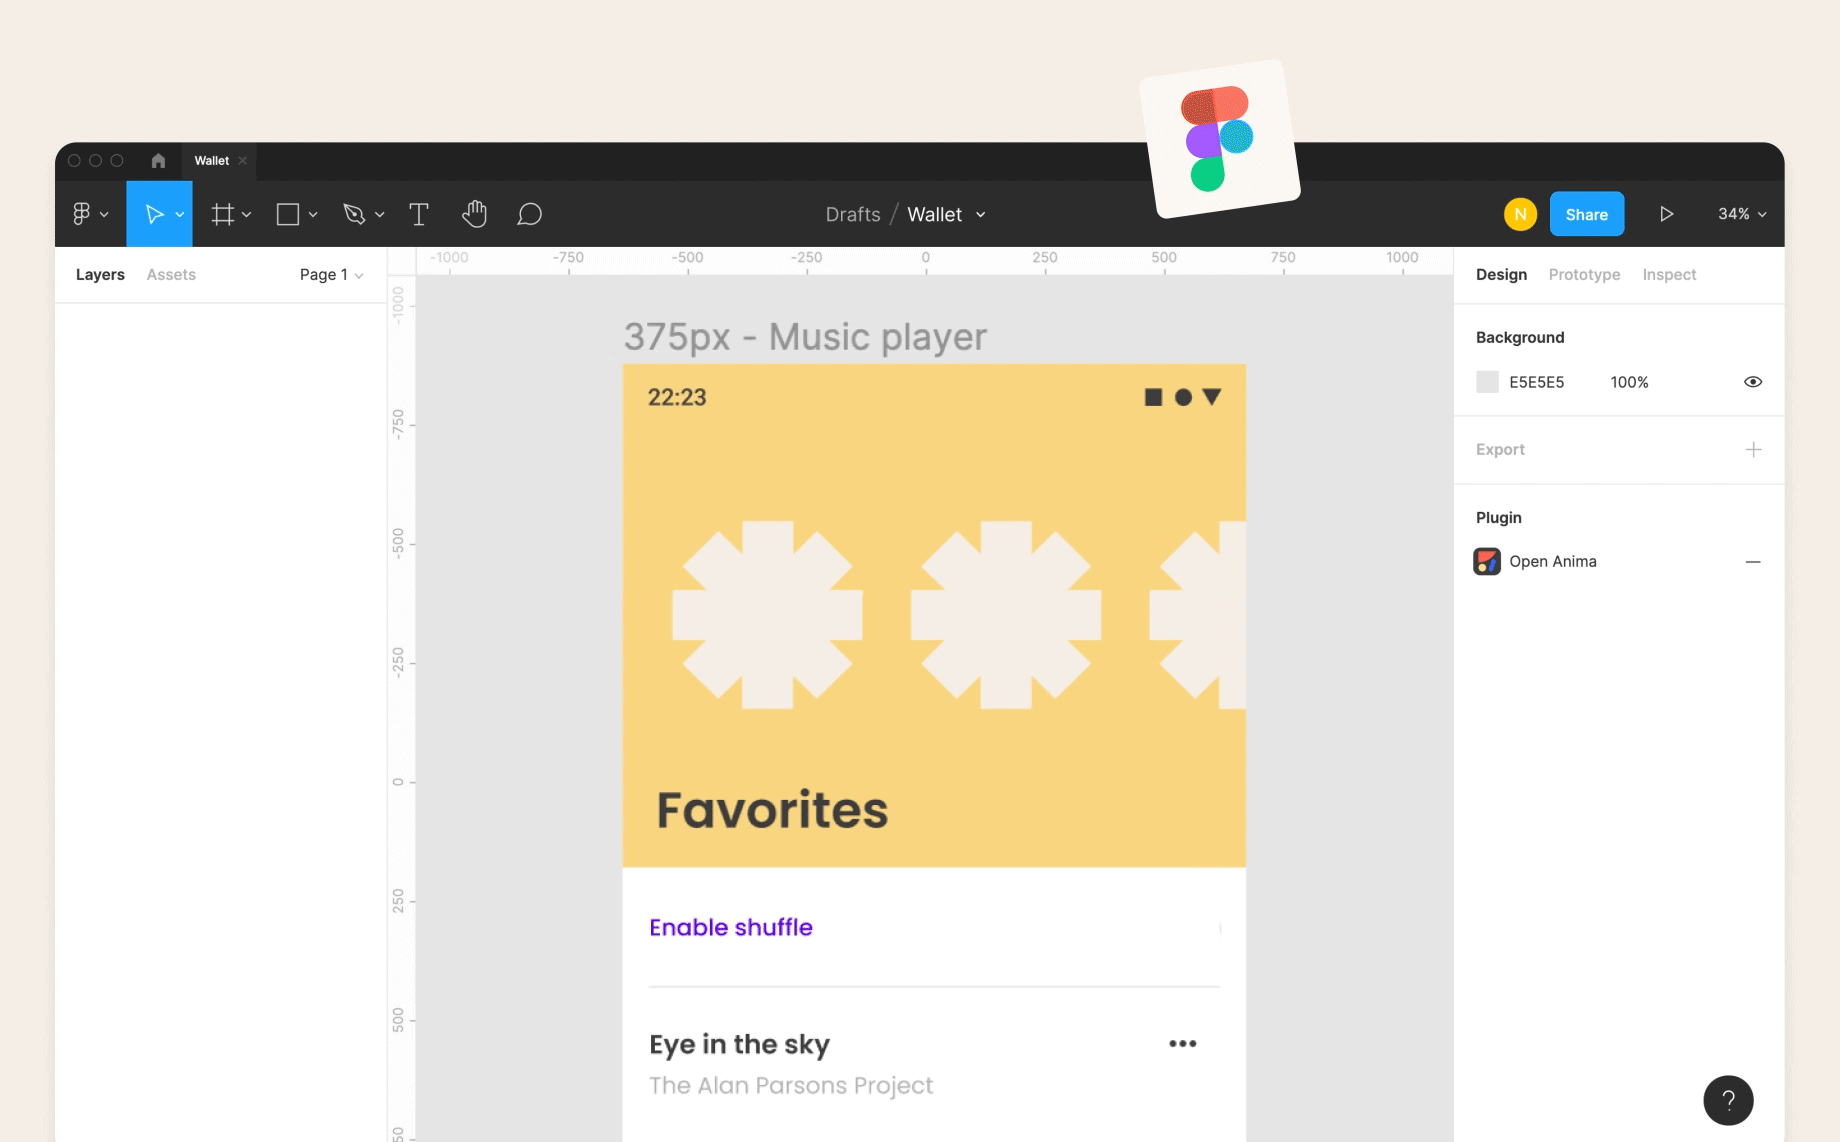 Opening Anima's Material Design widget library in Figma